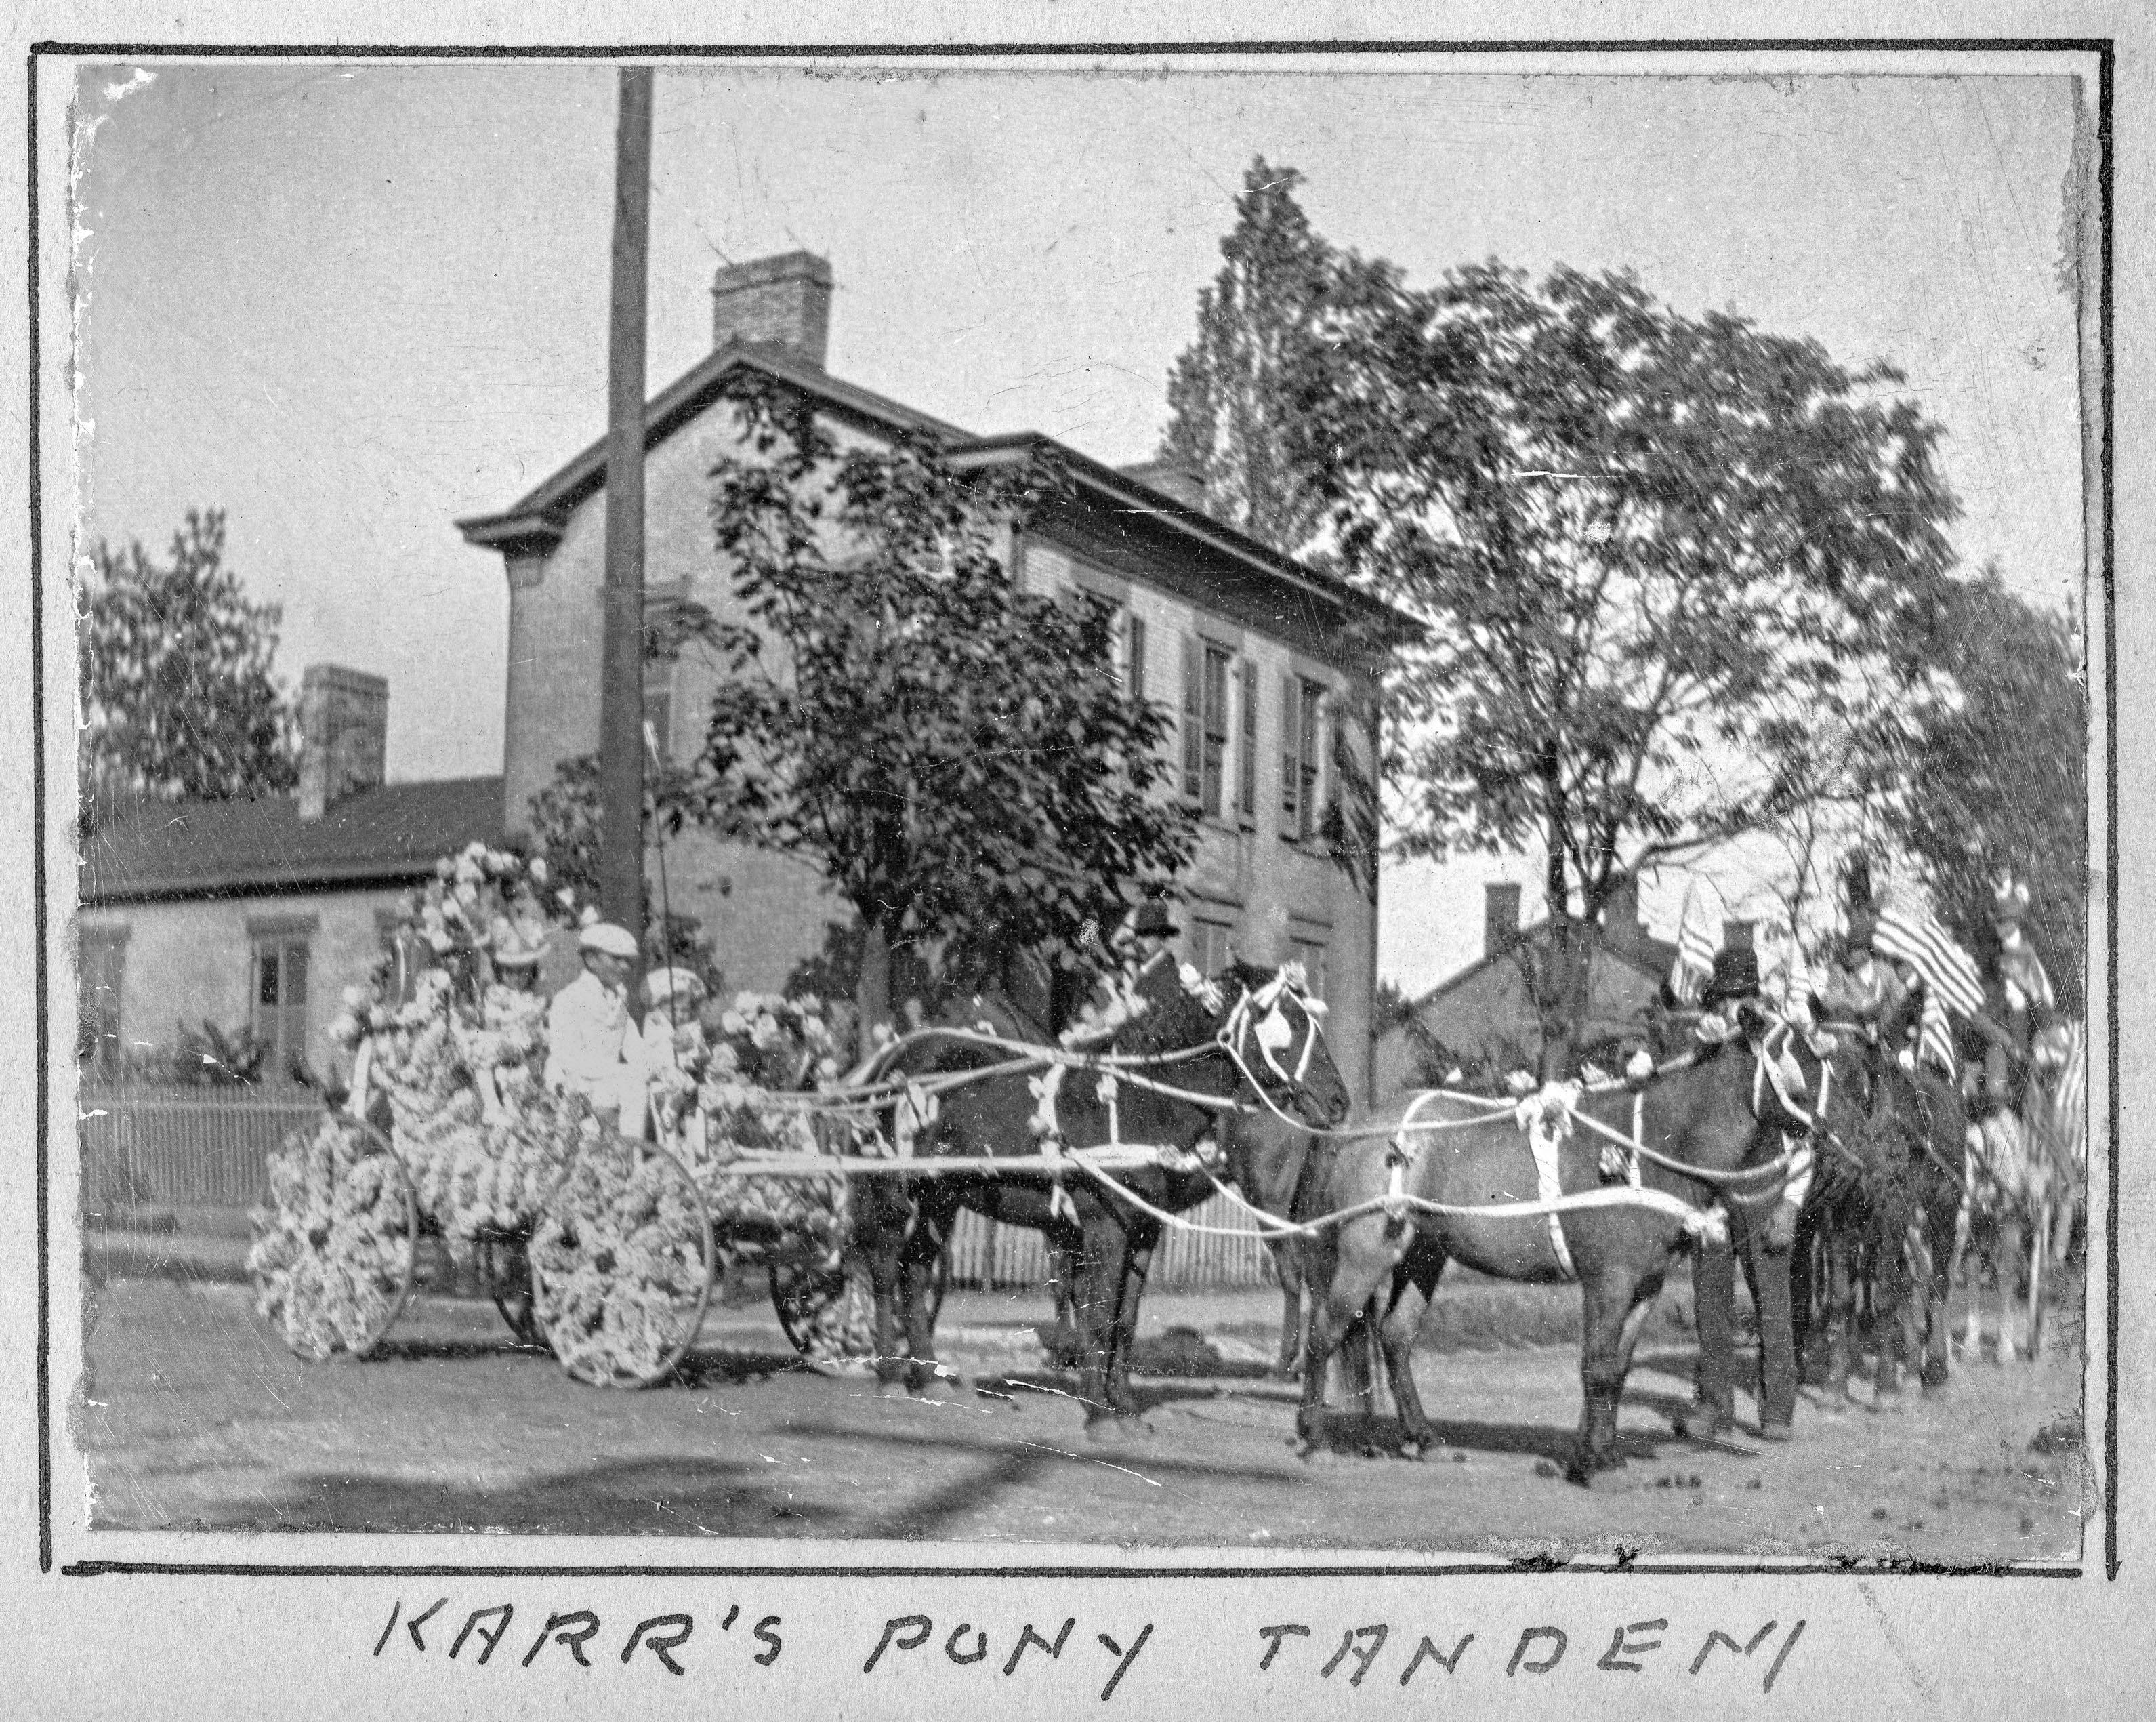 Karr's Pony Tandem, Flower Parade Float at the Belleville, Illinois, town fair, 1901. Karr Supply Company was at West Main Street in Belleville and were engineers and contractors, manufacturers of hot water and steam healing apparatus, plumbers and dealers In fixtures and electric chandeliers.

Photo taken by Samuel Peake Hyde, b. Feb 17, 1850, St. Francisville, Clark, Missouri; d. April 28, 1921, Belleville, St. Clair, Illinois., son of Edwin C. Hyde and Elizabeth Hyde. Samuel was a clerk for J. G. Green Company, 1867, and then worked with his father at E.C. Hyde & Co., Storage and Commission, 4 South Commercial Street, Belleville, IL. Sam resided at 37 North Douglas, Belleville.

